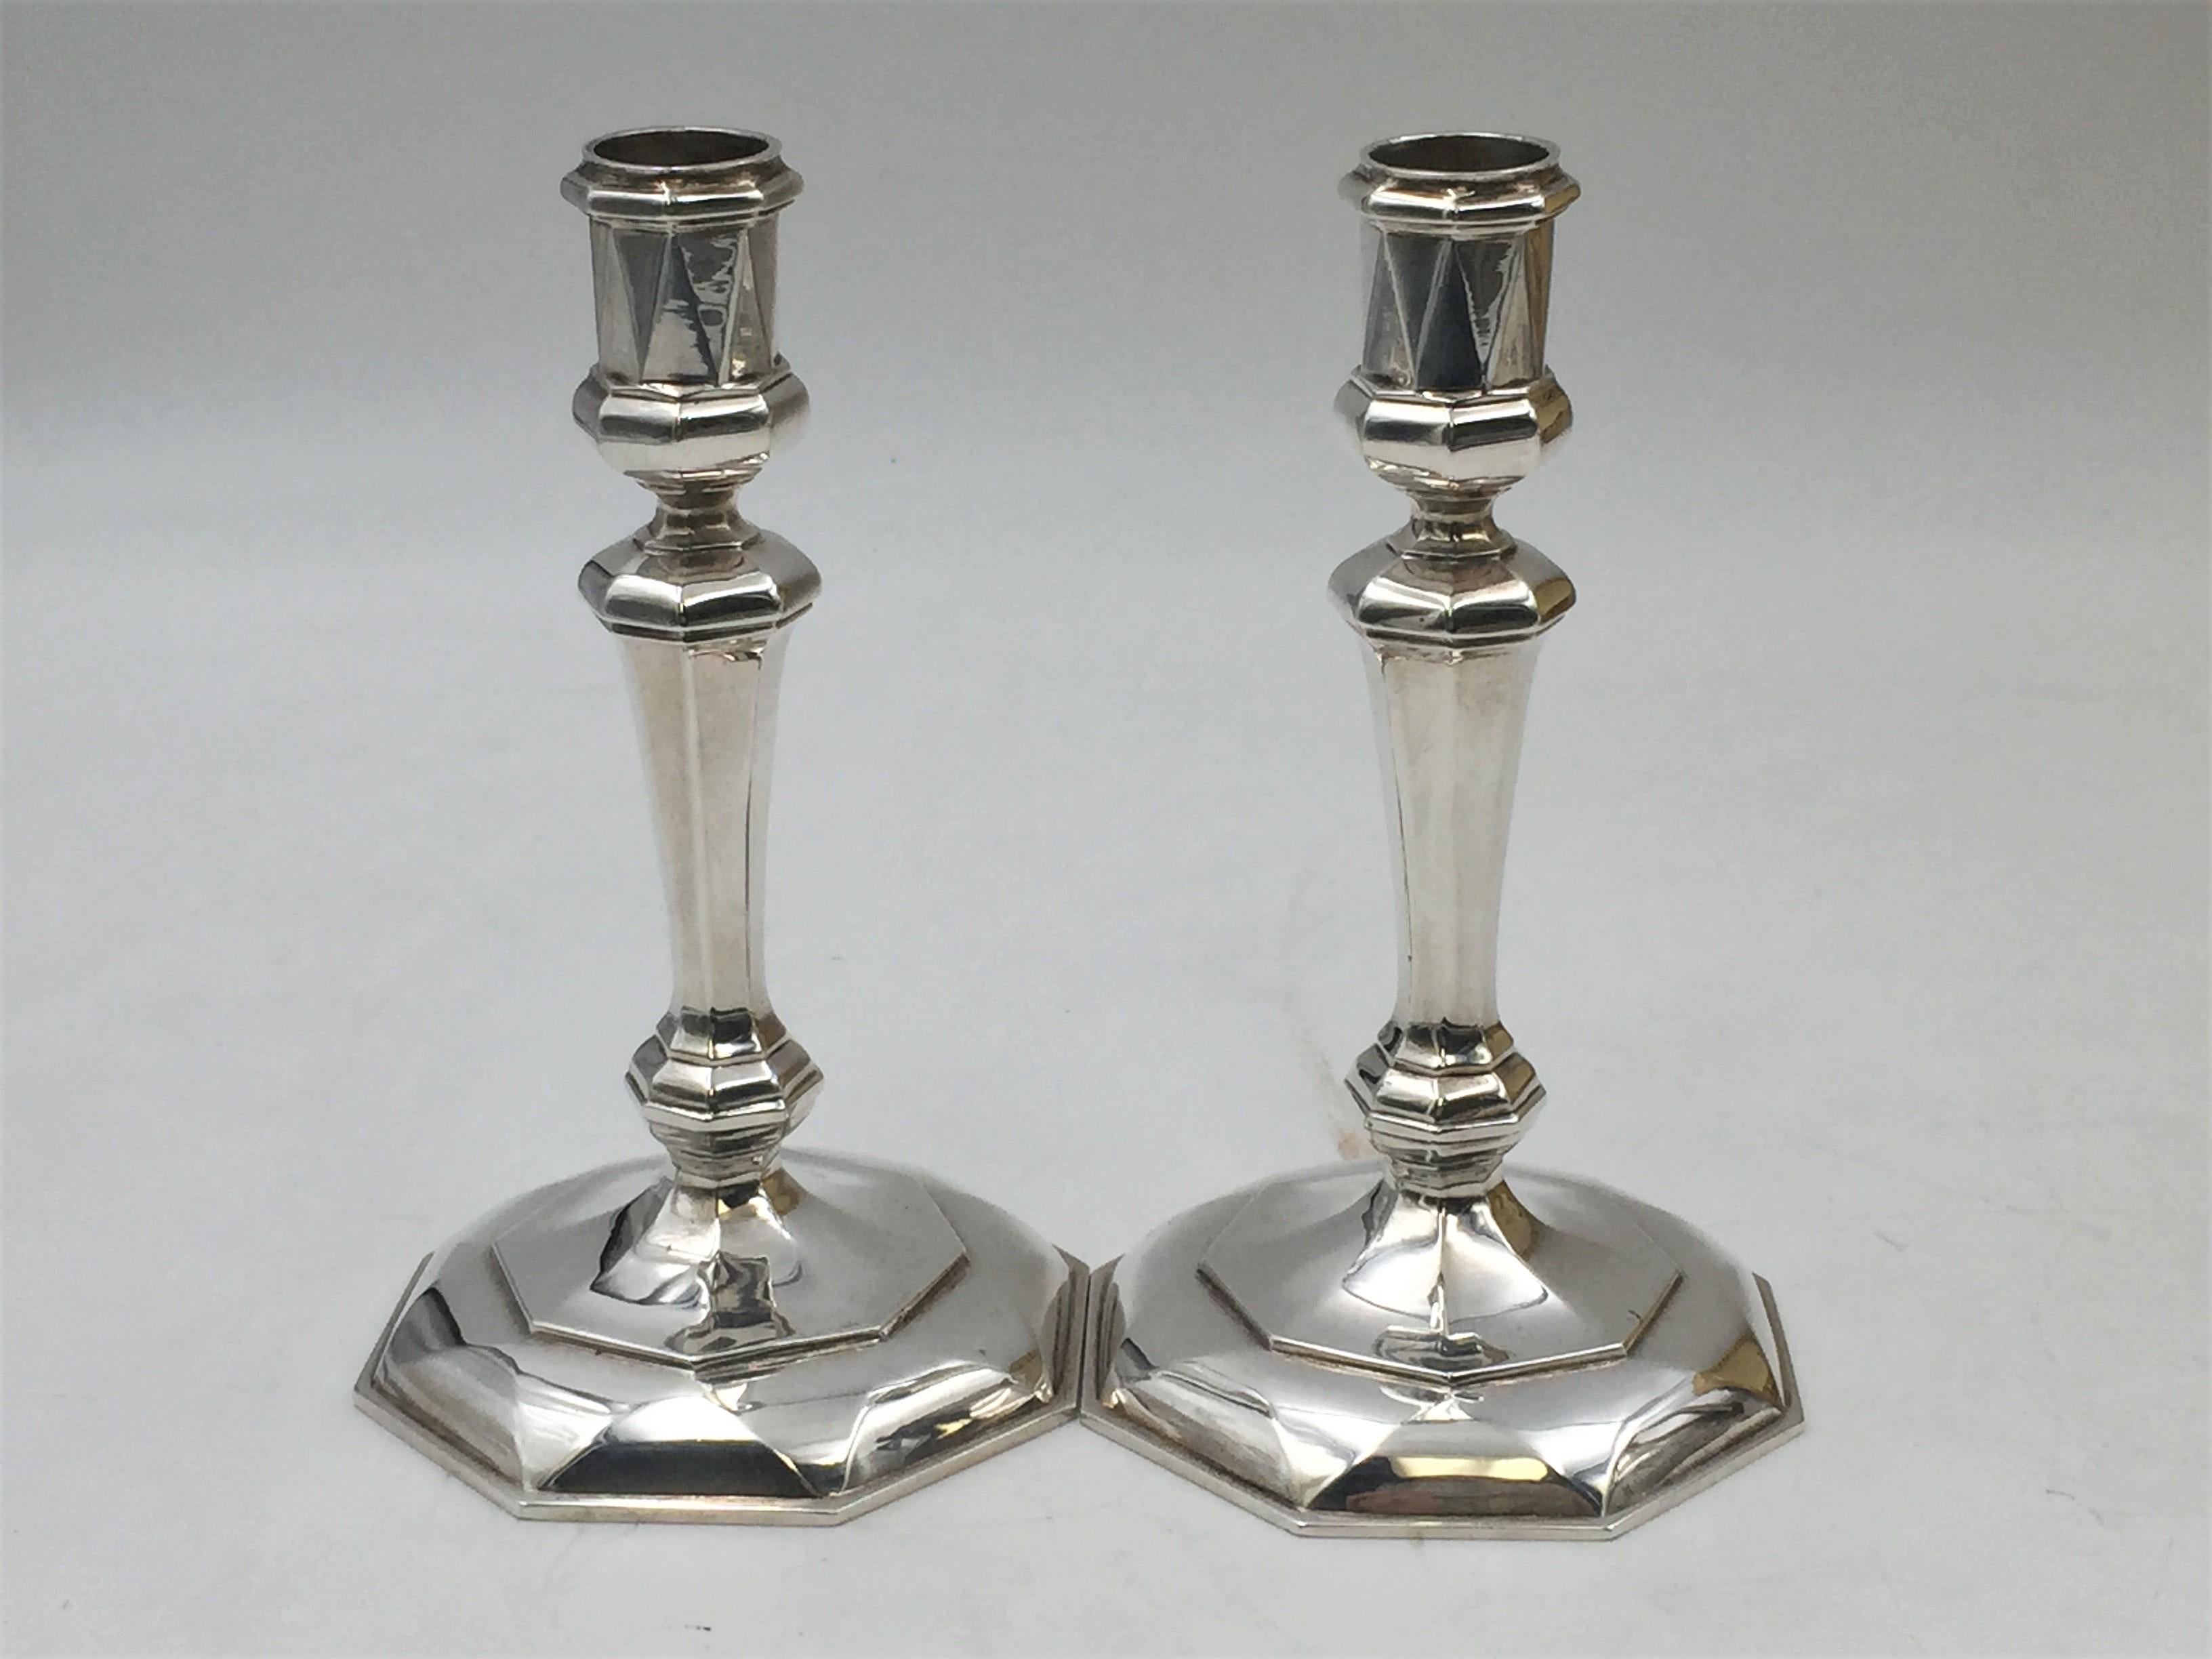 Pair of multi-faceted English cast silver tapersticks/ candlesticks, by illustrious designer CJ Vander in the Queen Anne style and from 1970. Measuring 5.7” tall and 3.3” wide at base. Weighing 13.2 troy ounces. Bearing hallmarks as shown.

The